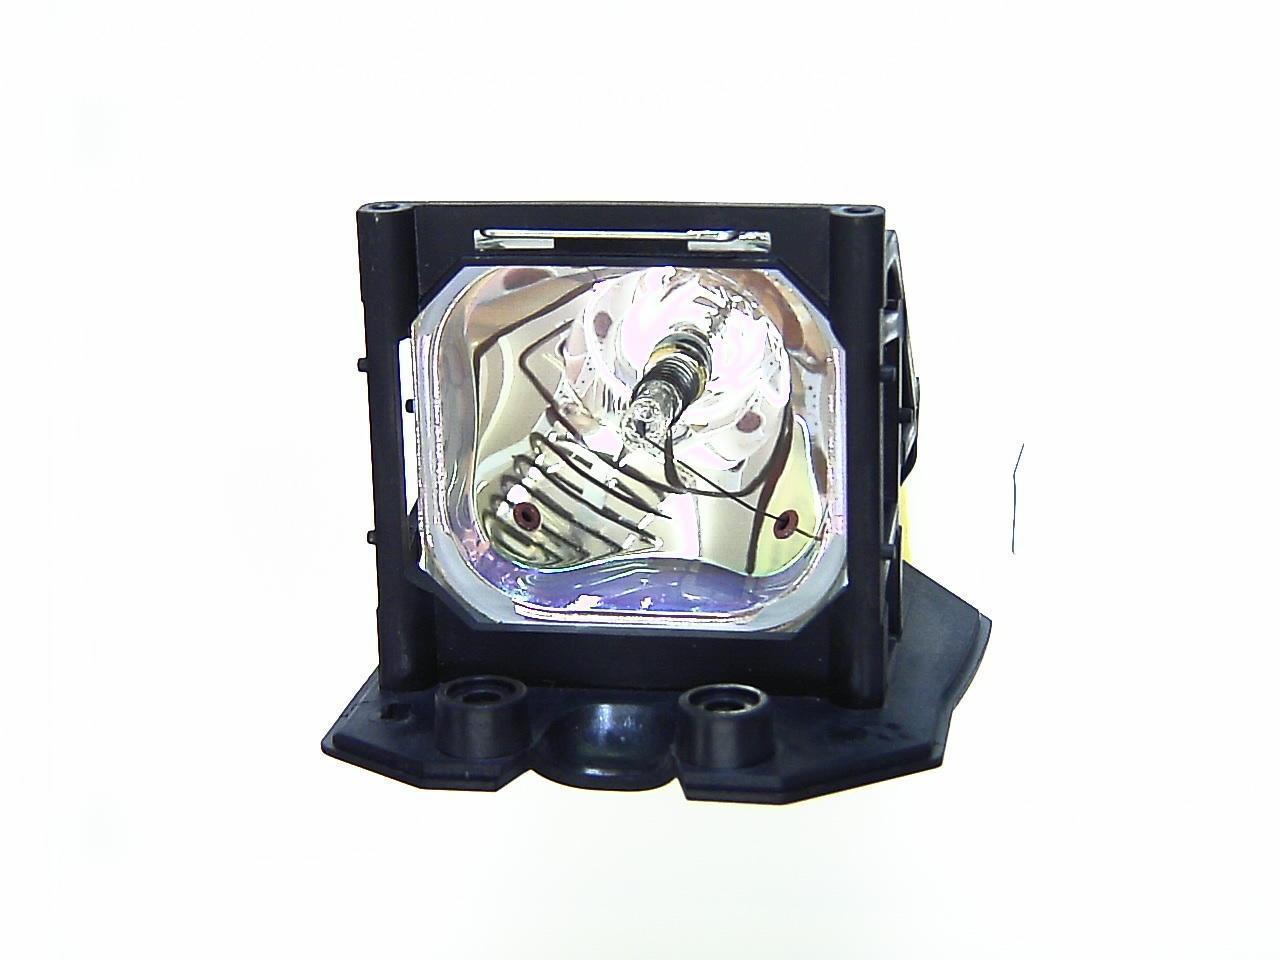 111-100 Digital Projection Projector Lamp Replacement. Projector Lamp Assembly with High Quality Genuine Original Philips UHP B